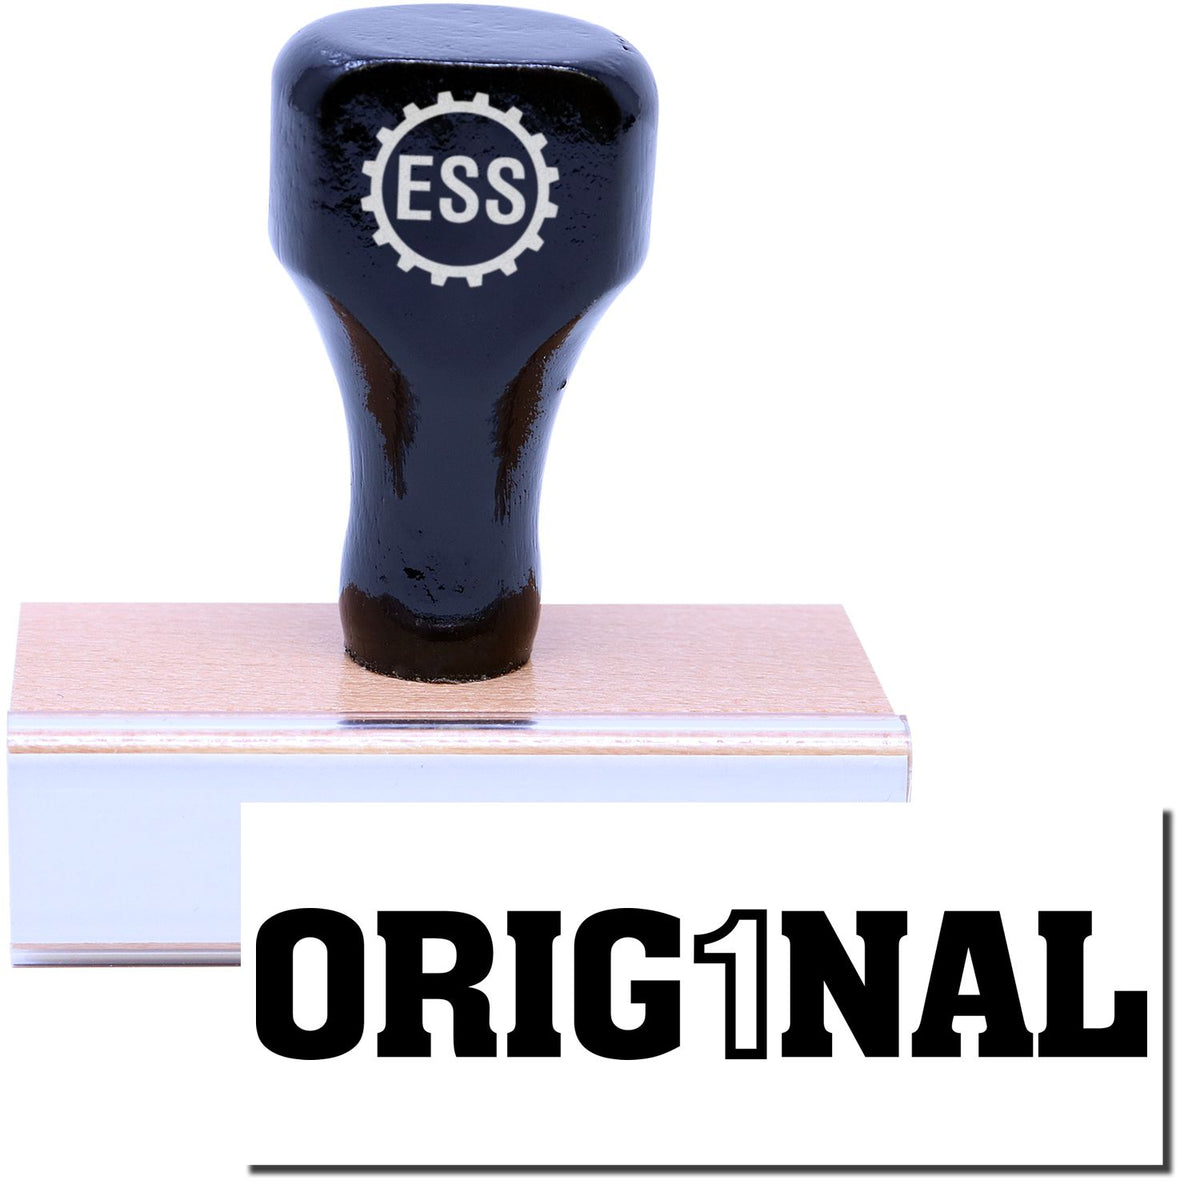 A stock office rubber stamp with a stamped image showing how the text &quot;ORIG1NAL&quot; is displayed after stamping.